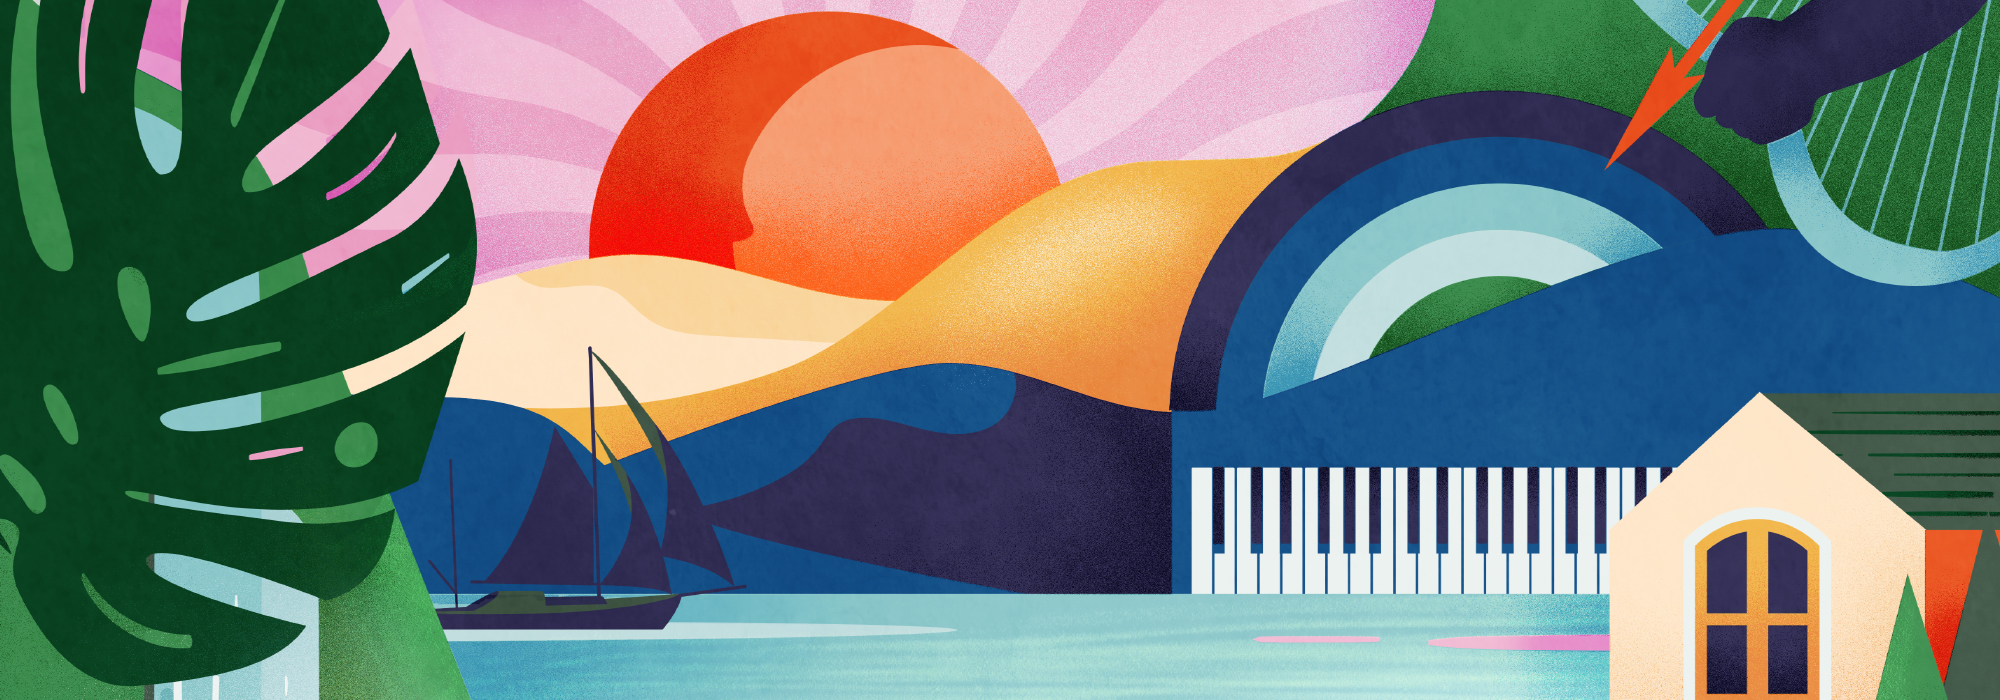 An artwork image showing a leaf, the sun a piano keyboard, a house and a boat on the water